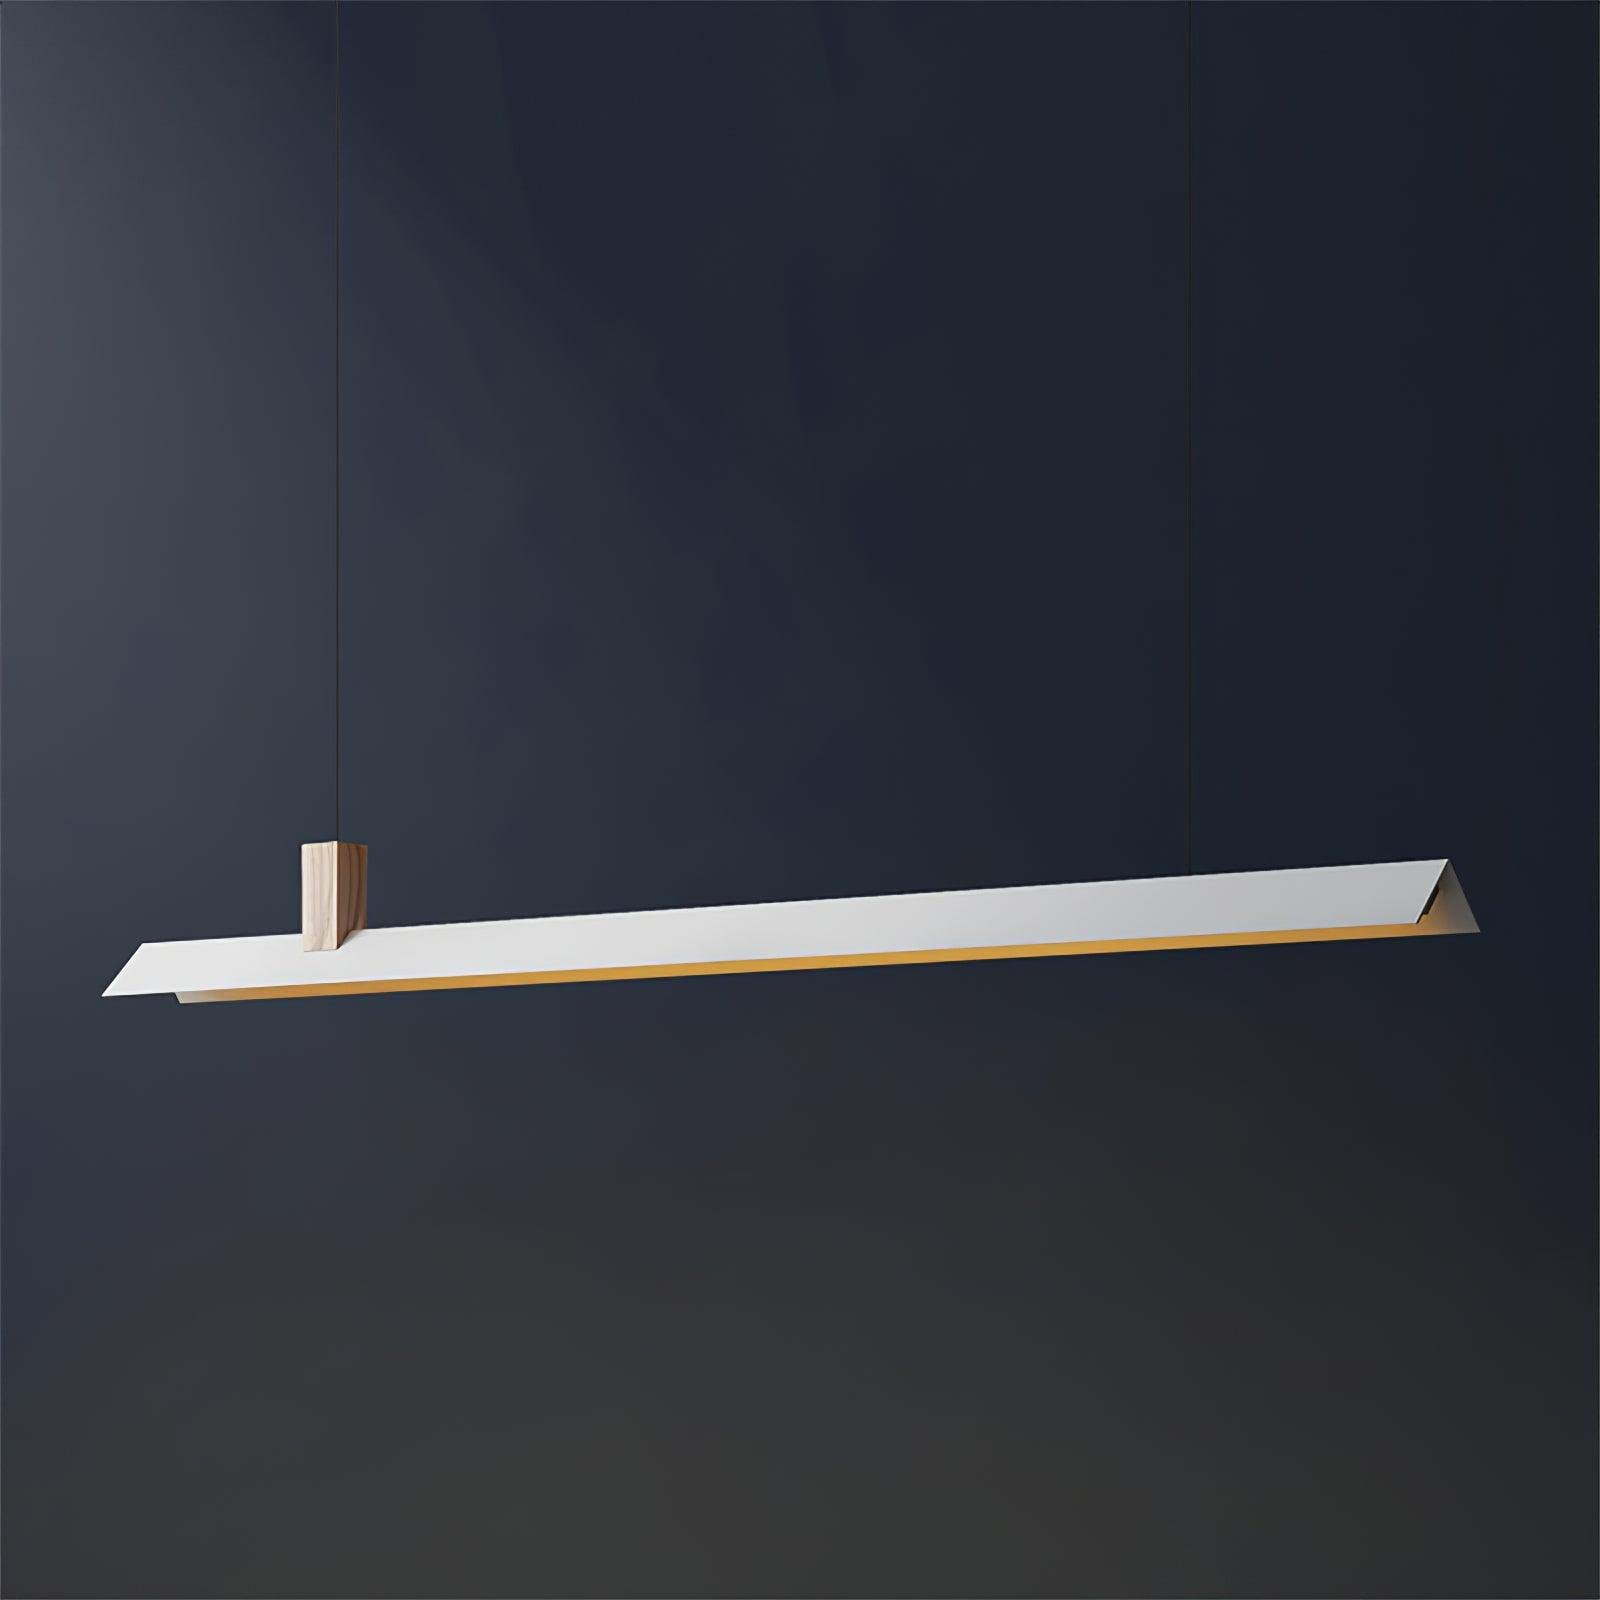 White Axis T Pendant Light with a size of 150cm (59") in length, 11cm (4.3") in width, and 150cm (59") in height, emitting a cool light.